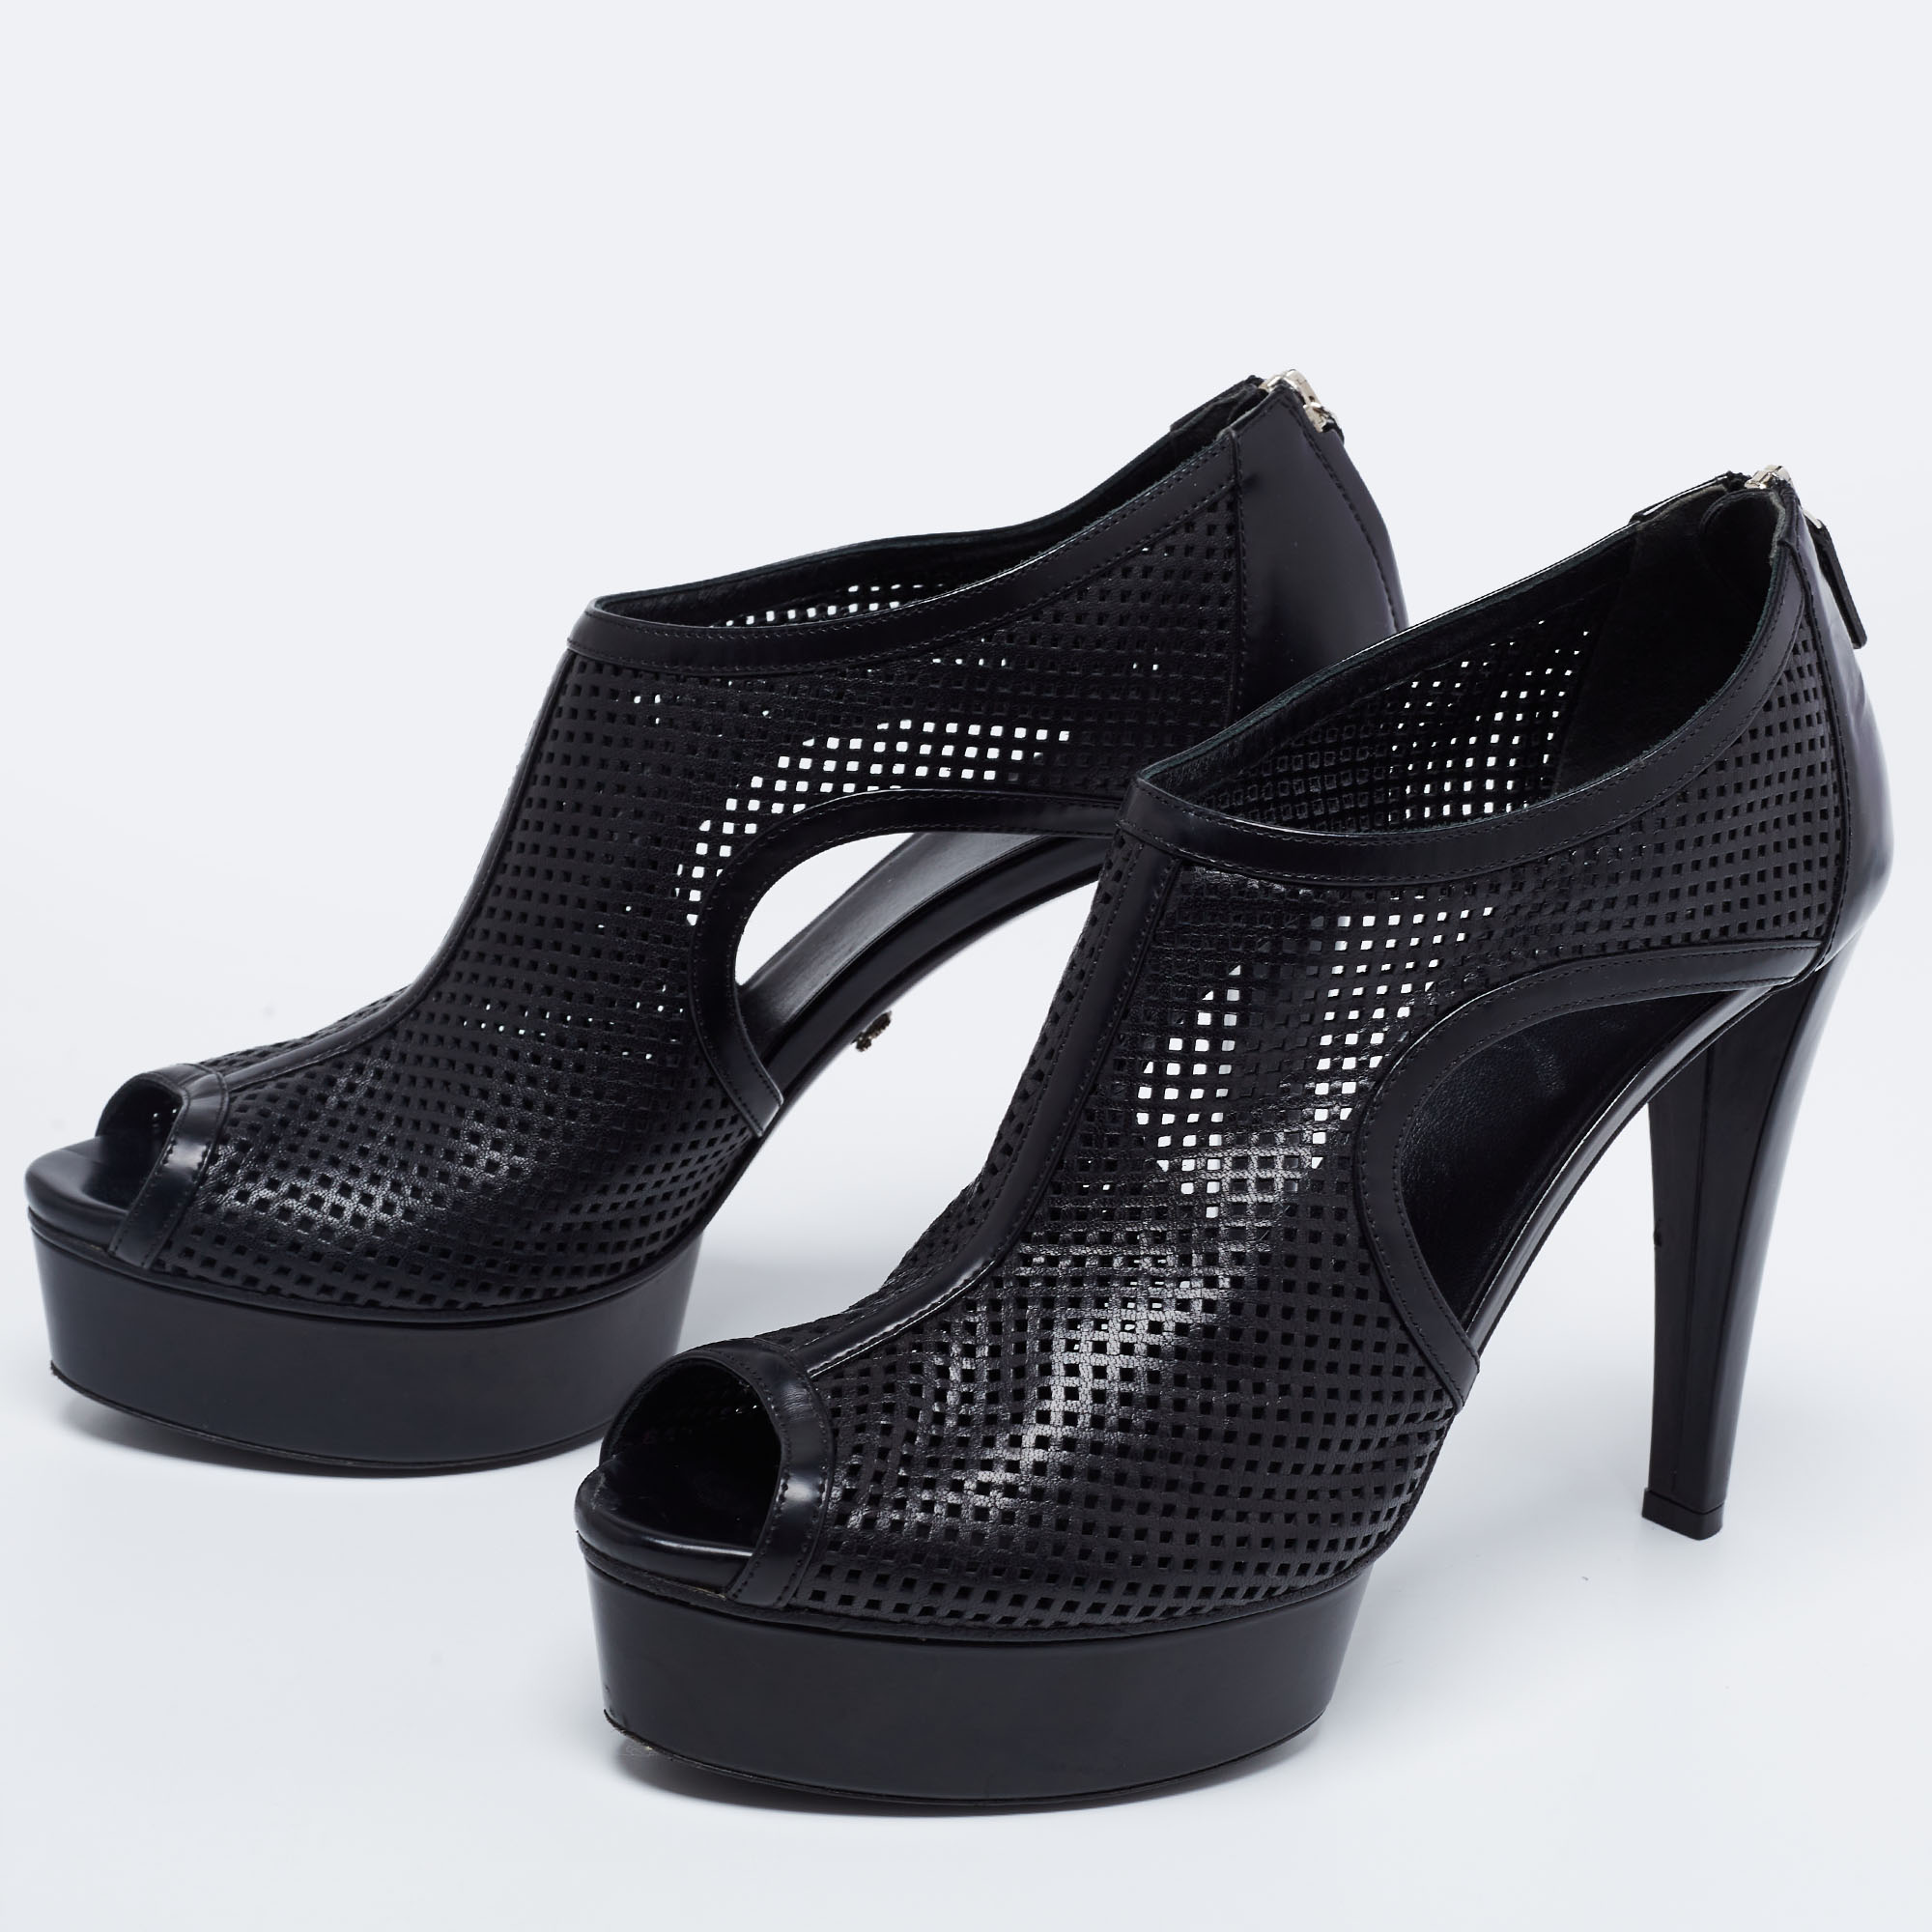 

Gucci Black Perforated Leather Kim Peep-Toe Platform Ankle Booties Size